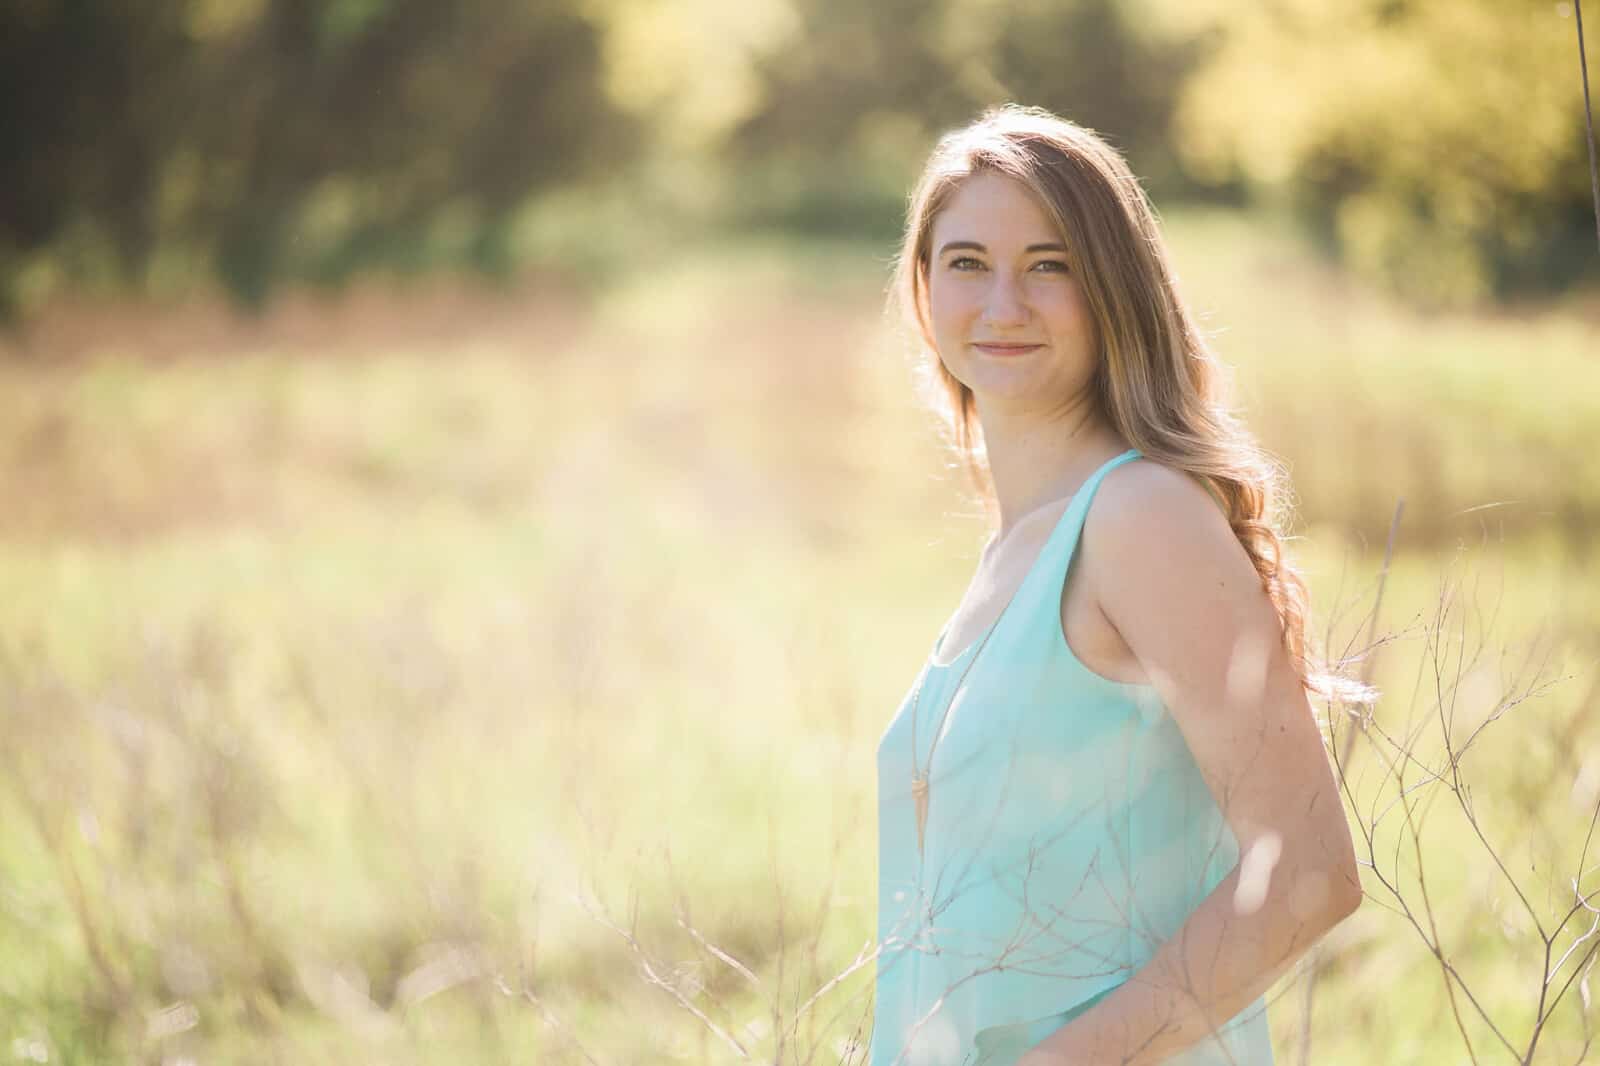 Teen girl with light brown long hair and aqua shirt stands in tall grass field for senior portrait on bright sunny day